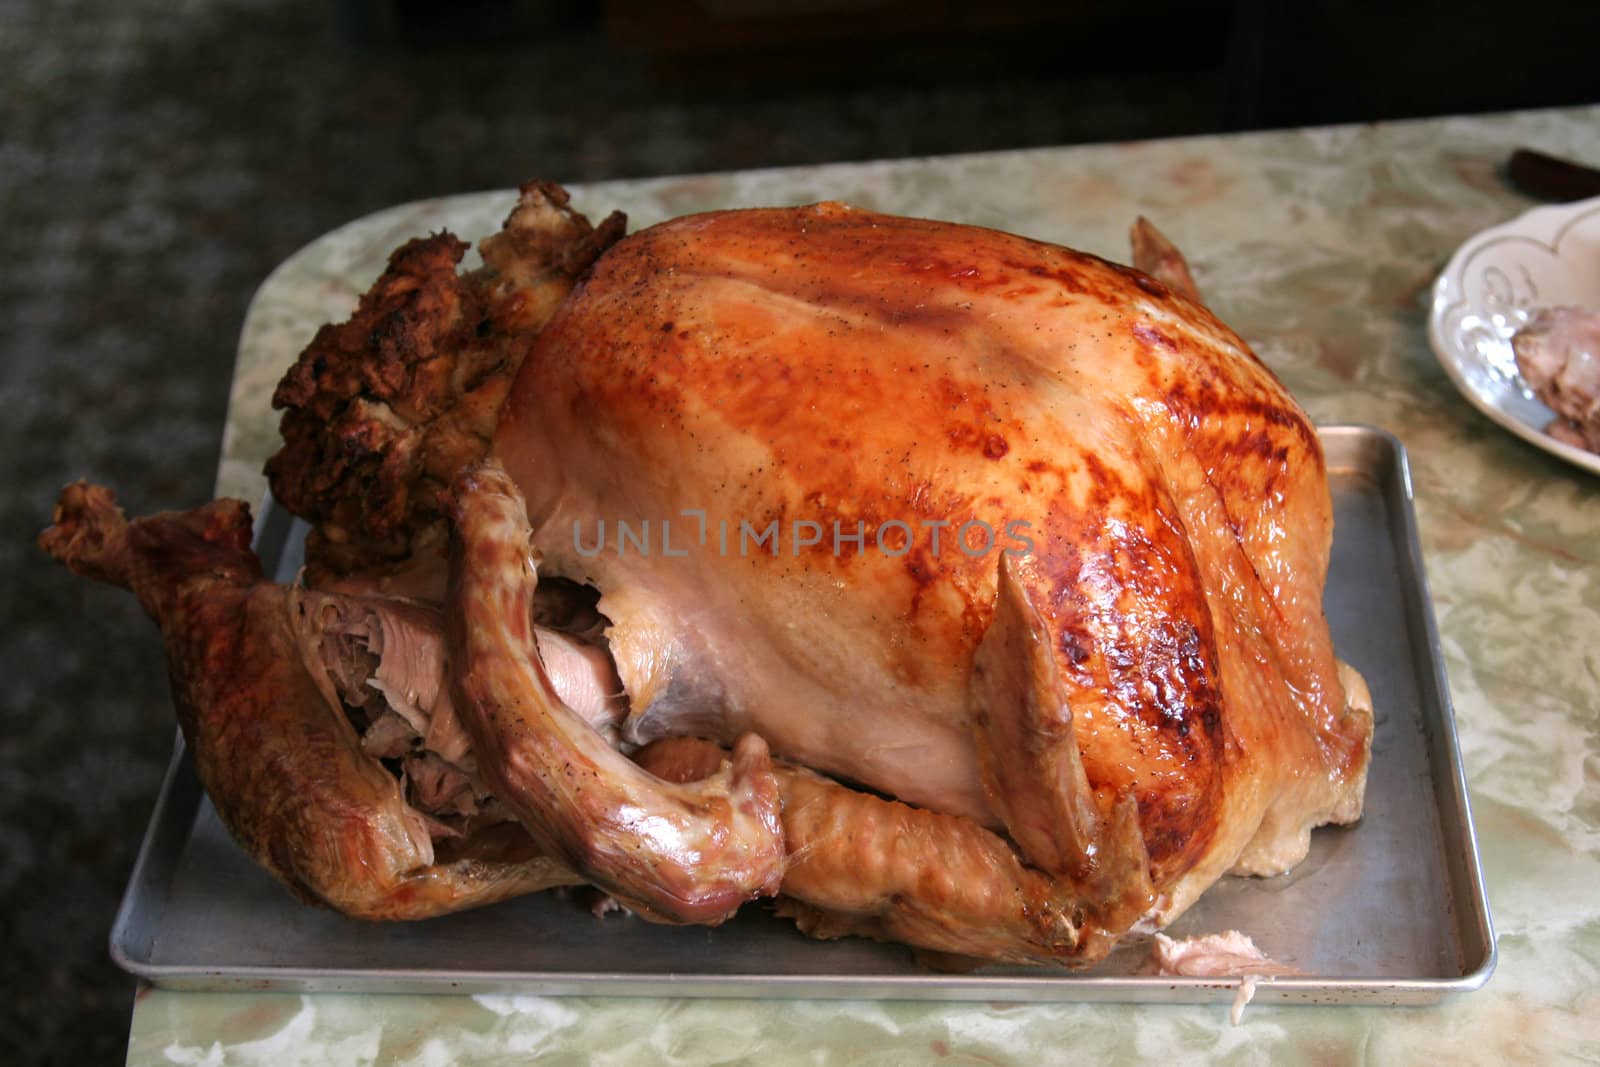 A fully stuffed turkey, just out of the oven.